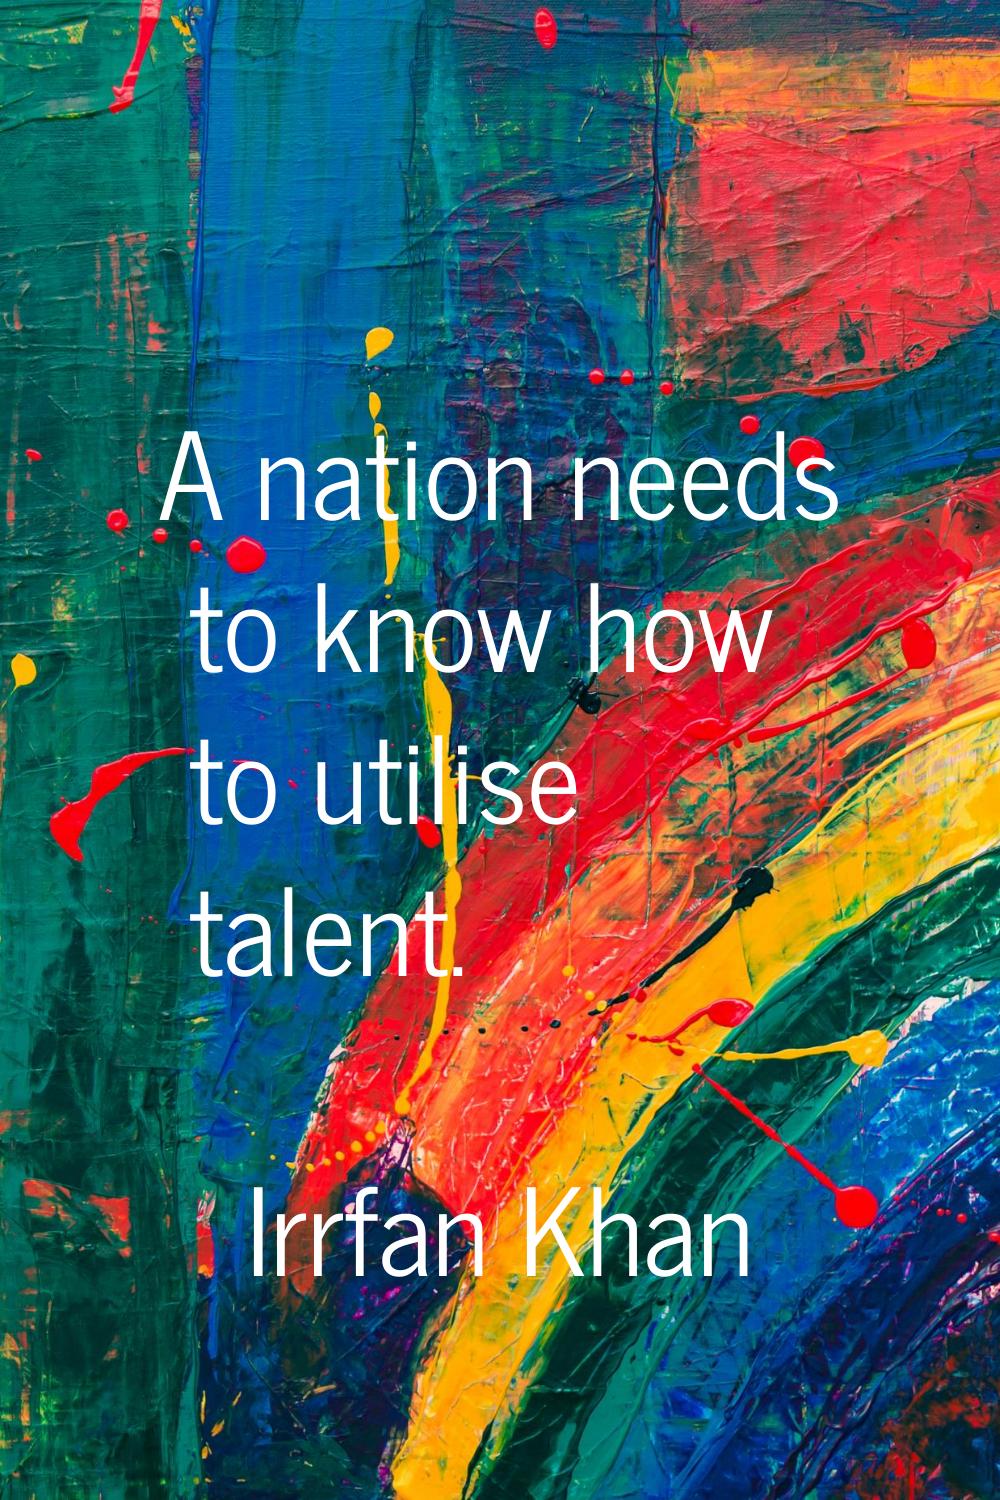 A nation needs to know how to utilise talent.